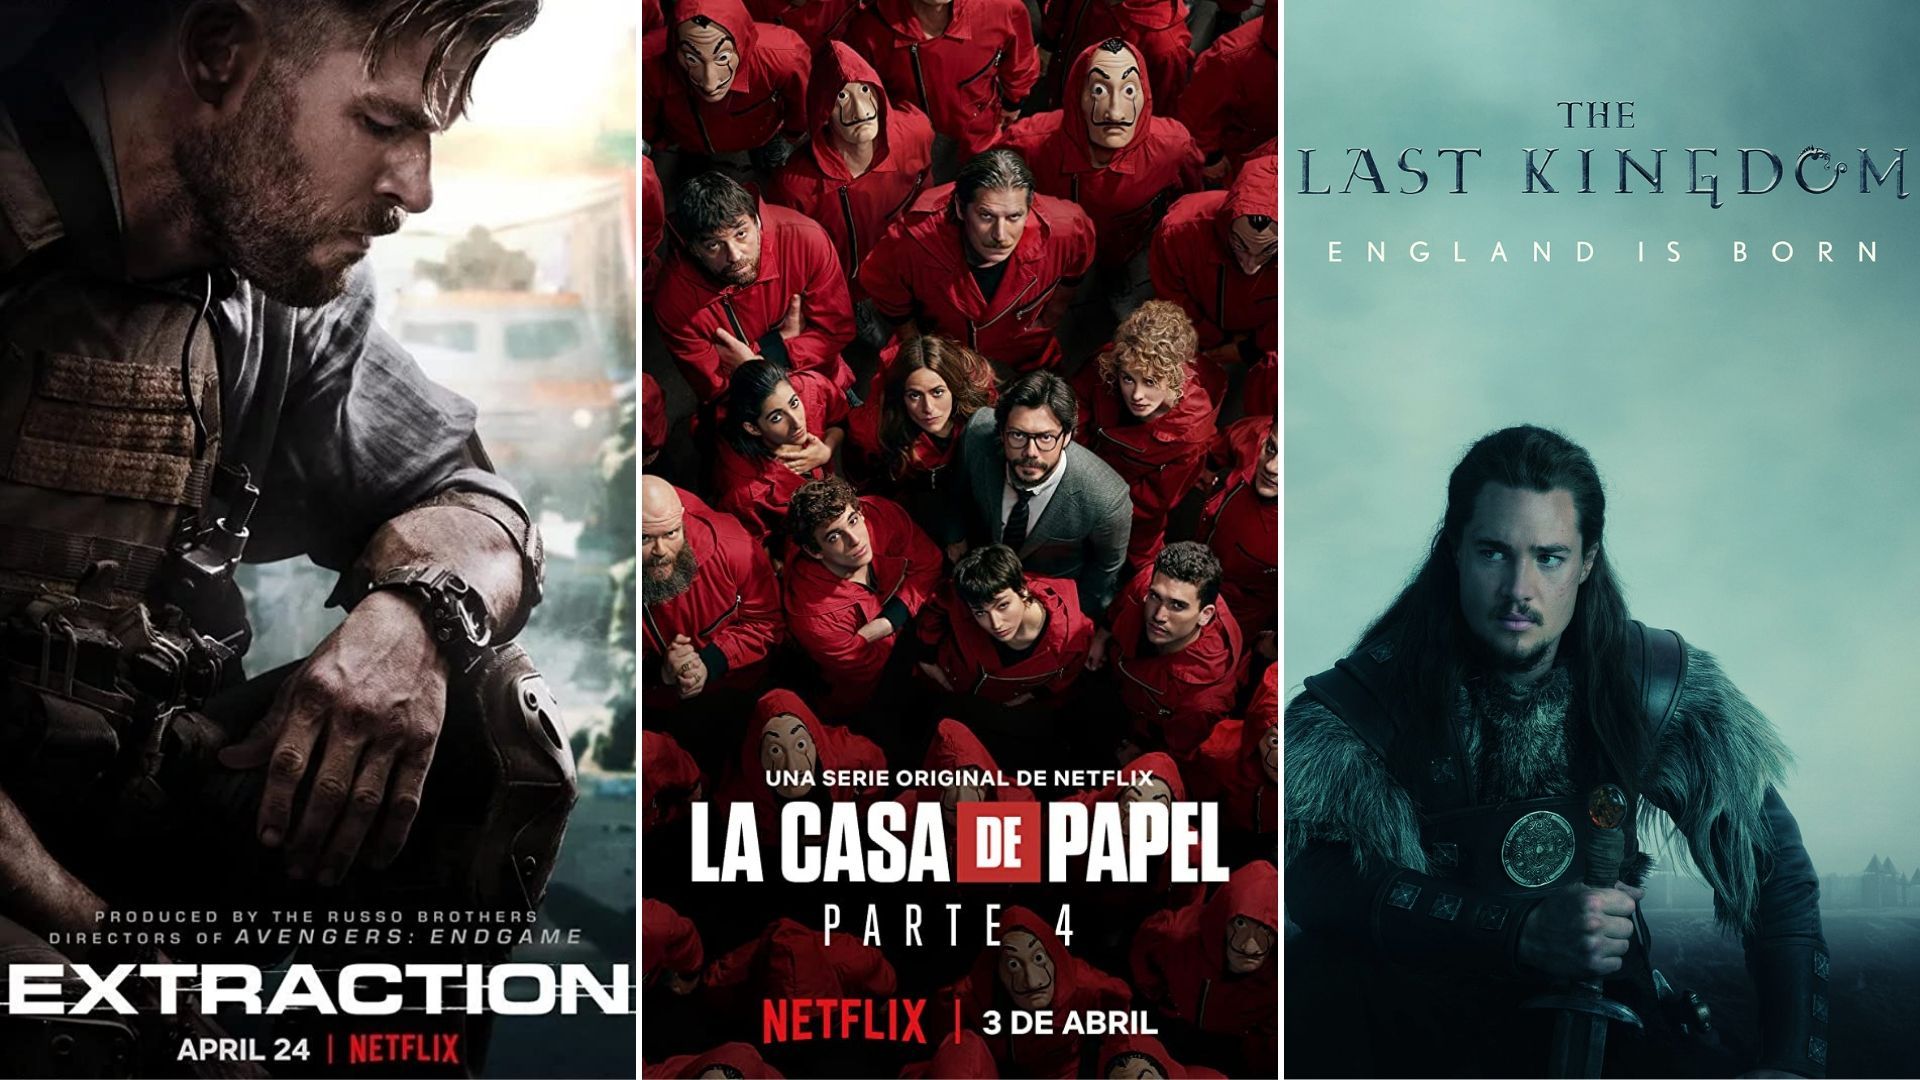 New Shows and Movies On Netflix April 2020: From Jesus Colmenar's